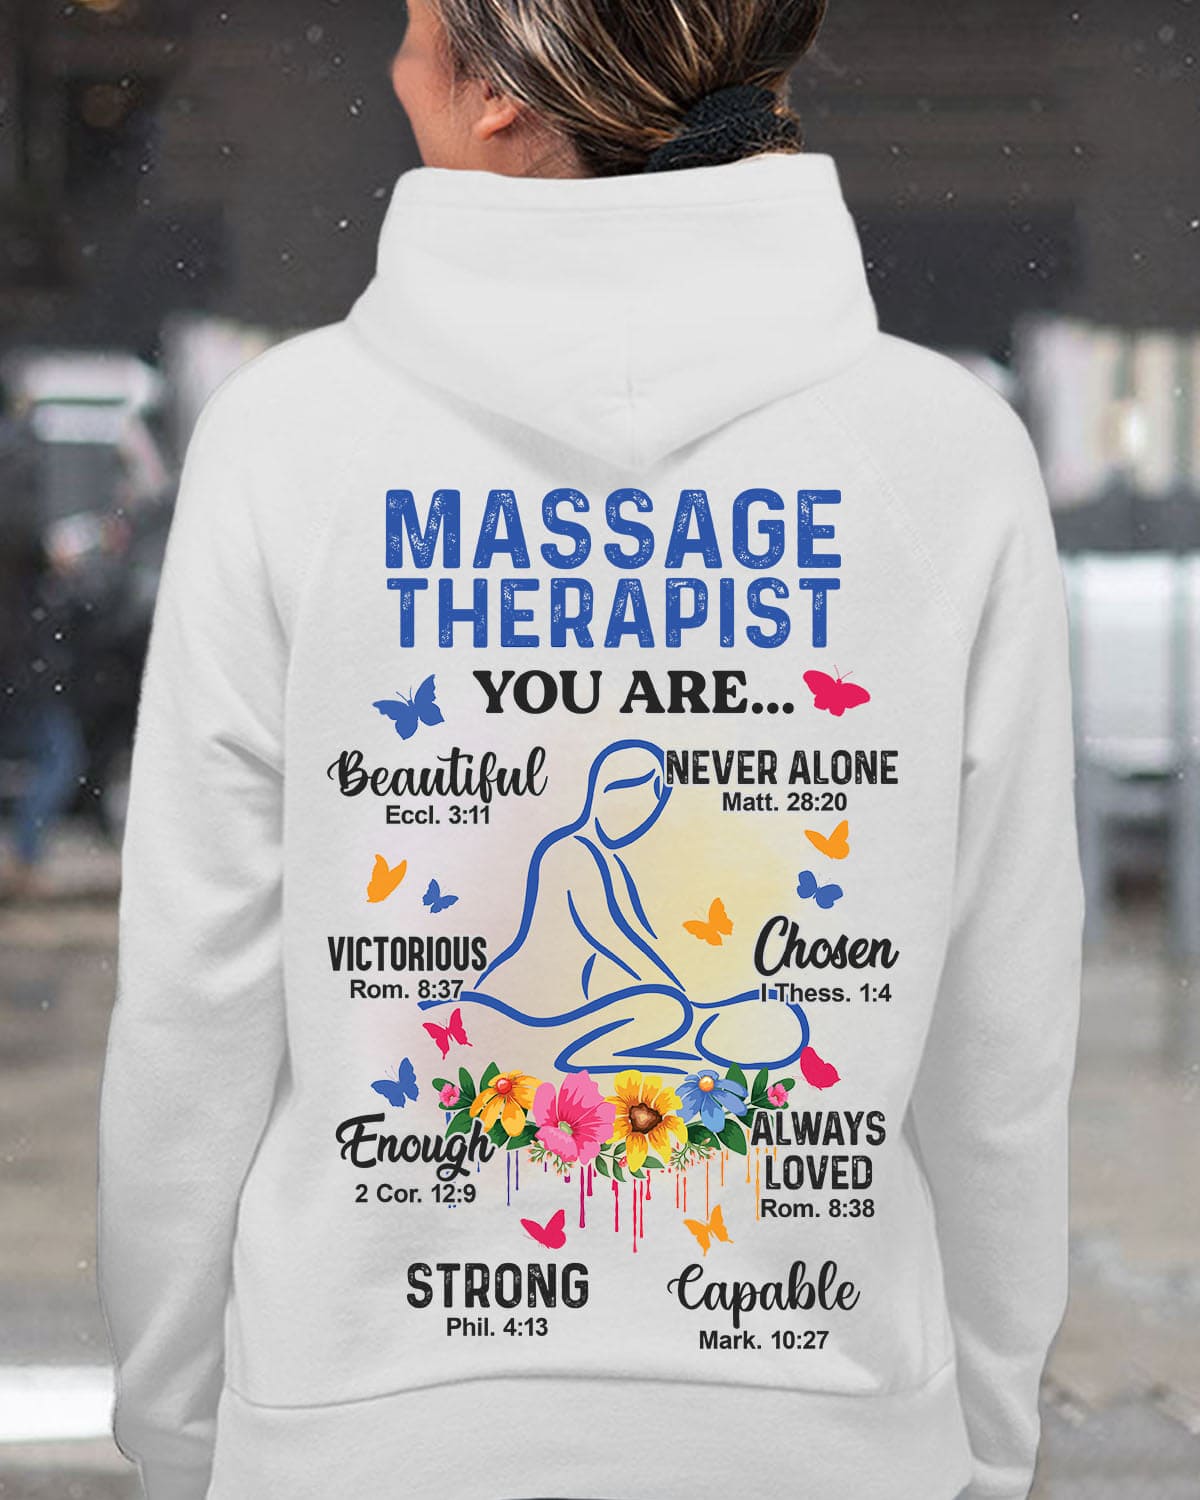 Massage therapit - Message therapist the job, Beautiful and victorious